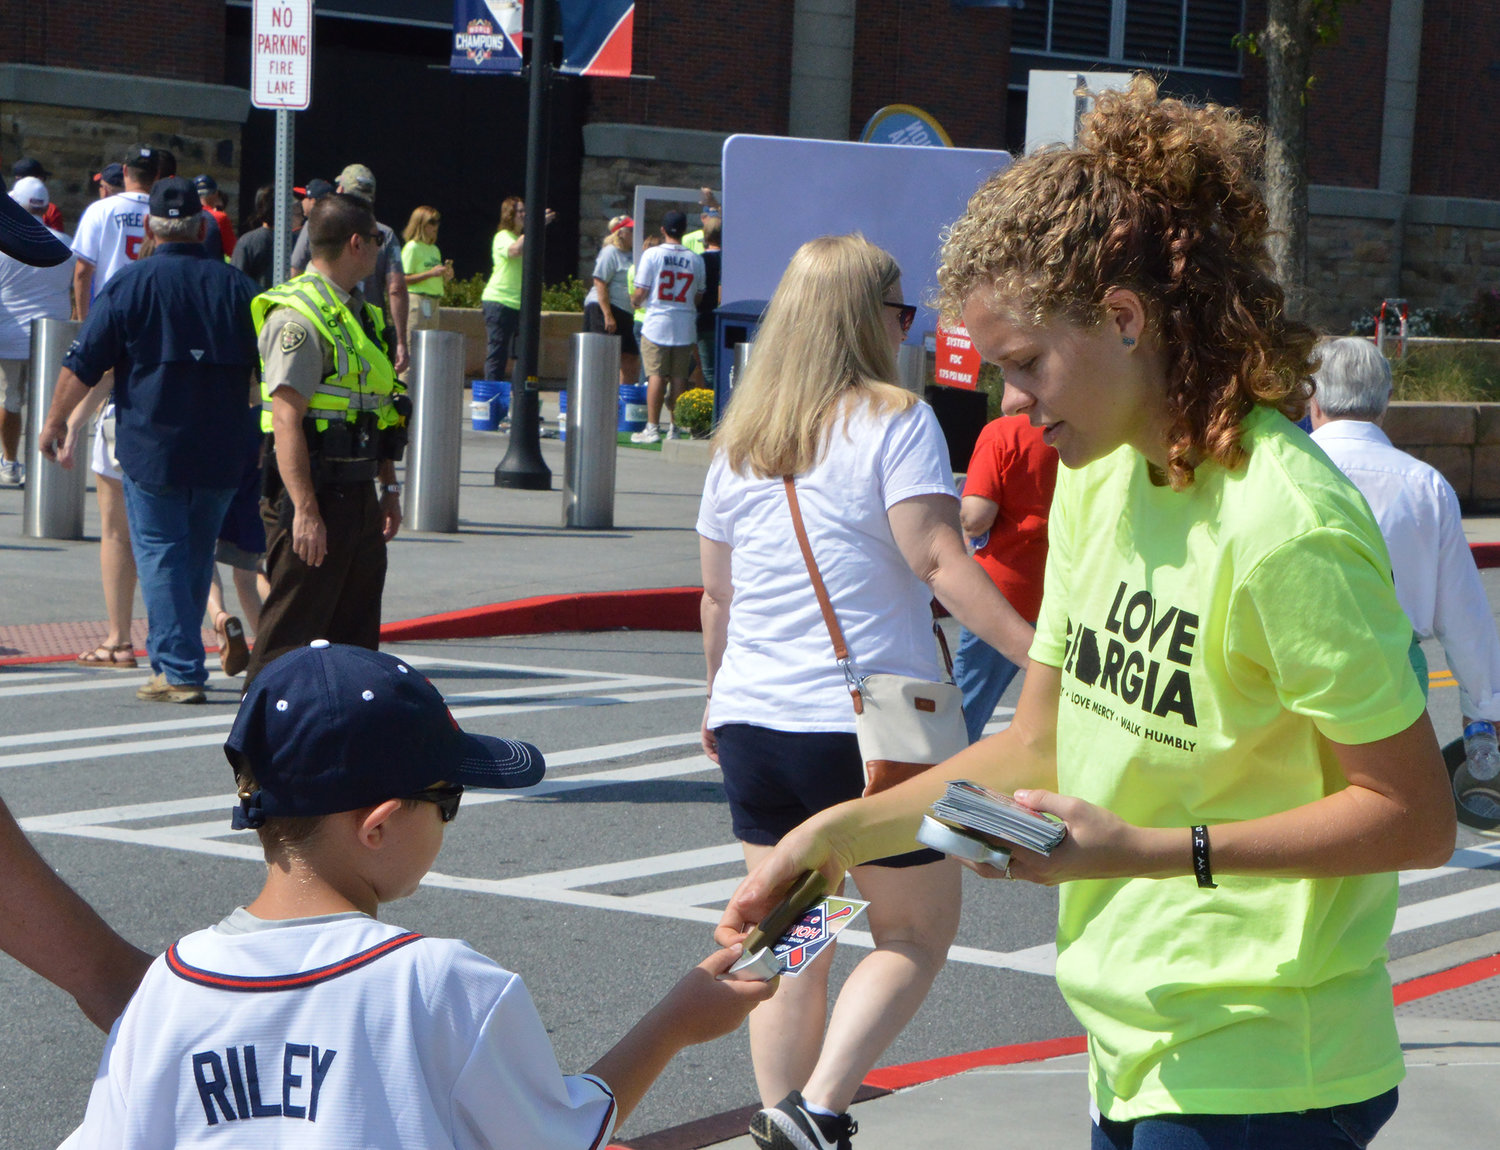 Nyah Carlson, from the Baptist Collegiate Ministry at Georgia State University, hands a hammer and pamphlet to a young fan to promote Wellspring Living, which provides housing to survivors of human trafficking, prior to the Atlanta Braves game Sunday, Sept. 18, 2022, in Atlanta. (Christian Index/Henry Durand)